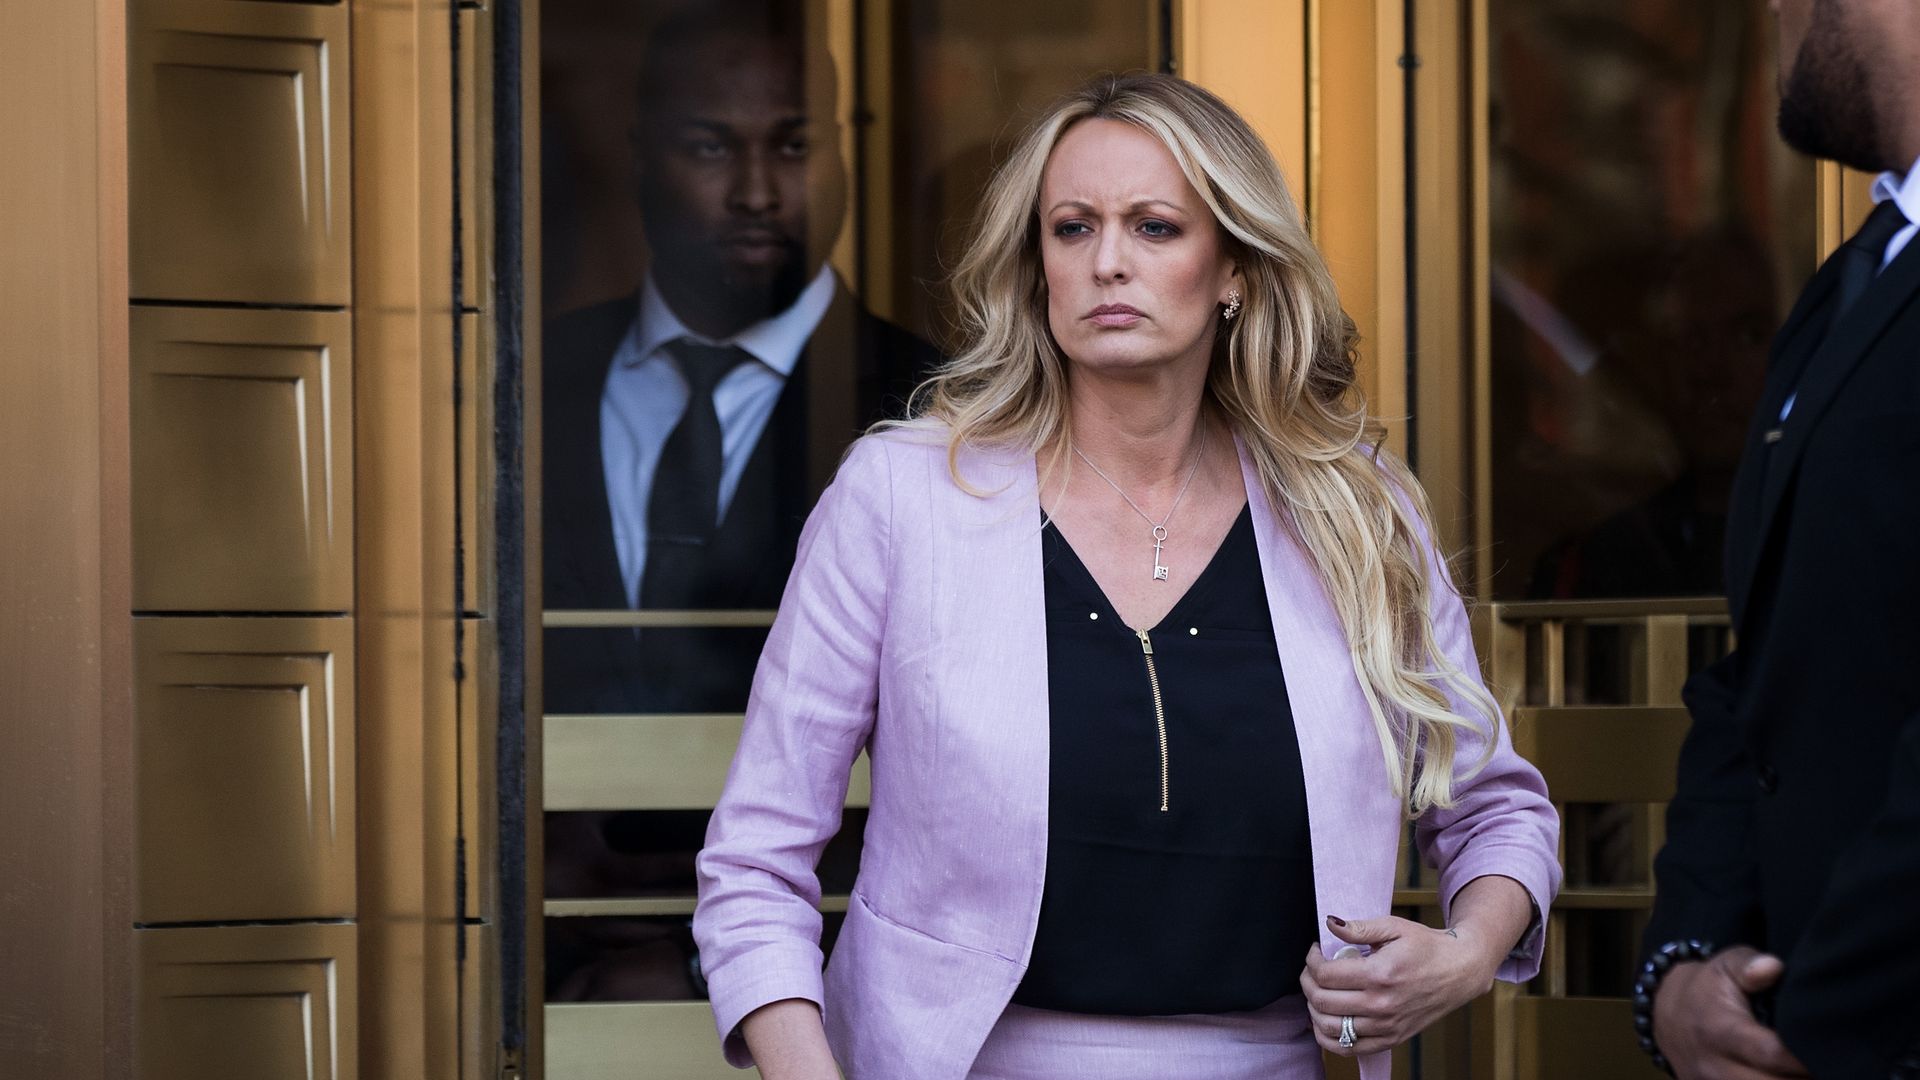 Adult film actress Stormy Daniels in New York City in April 2018.